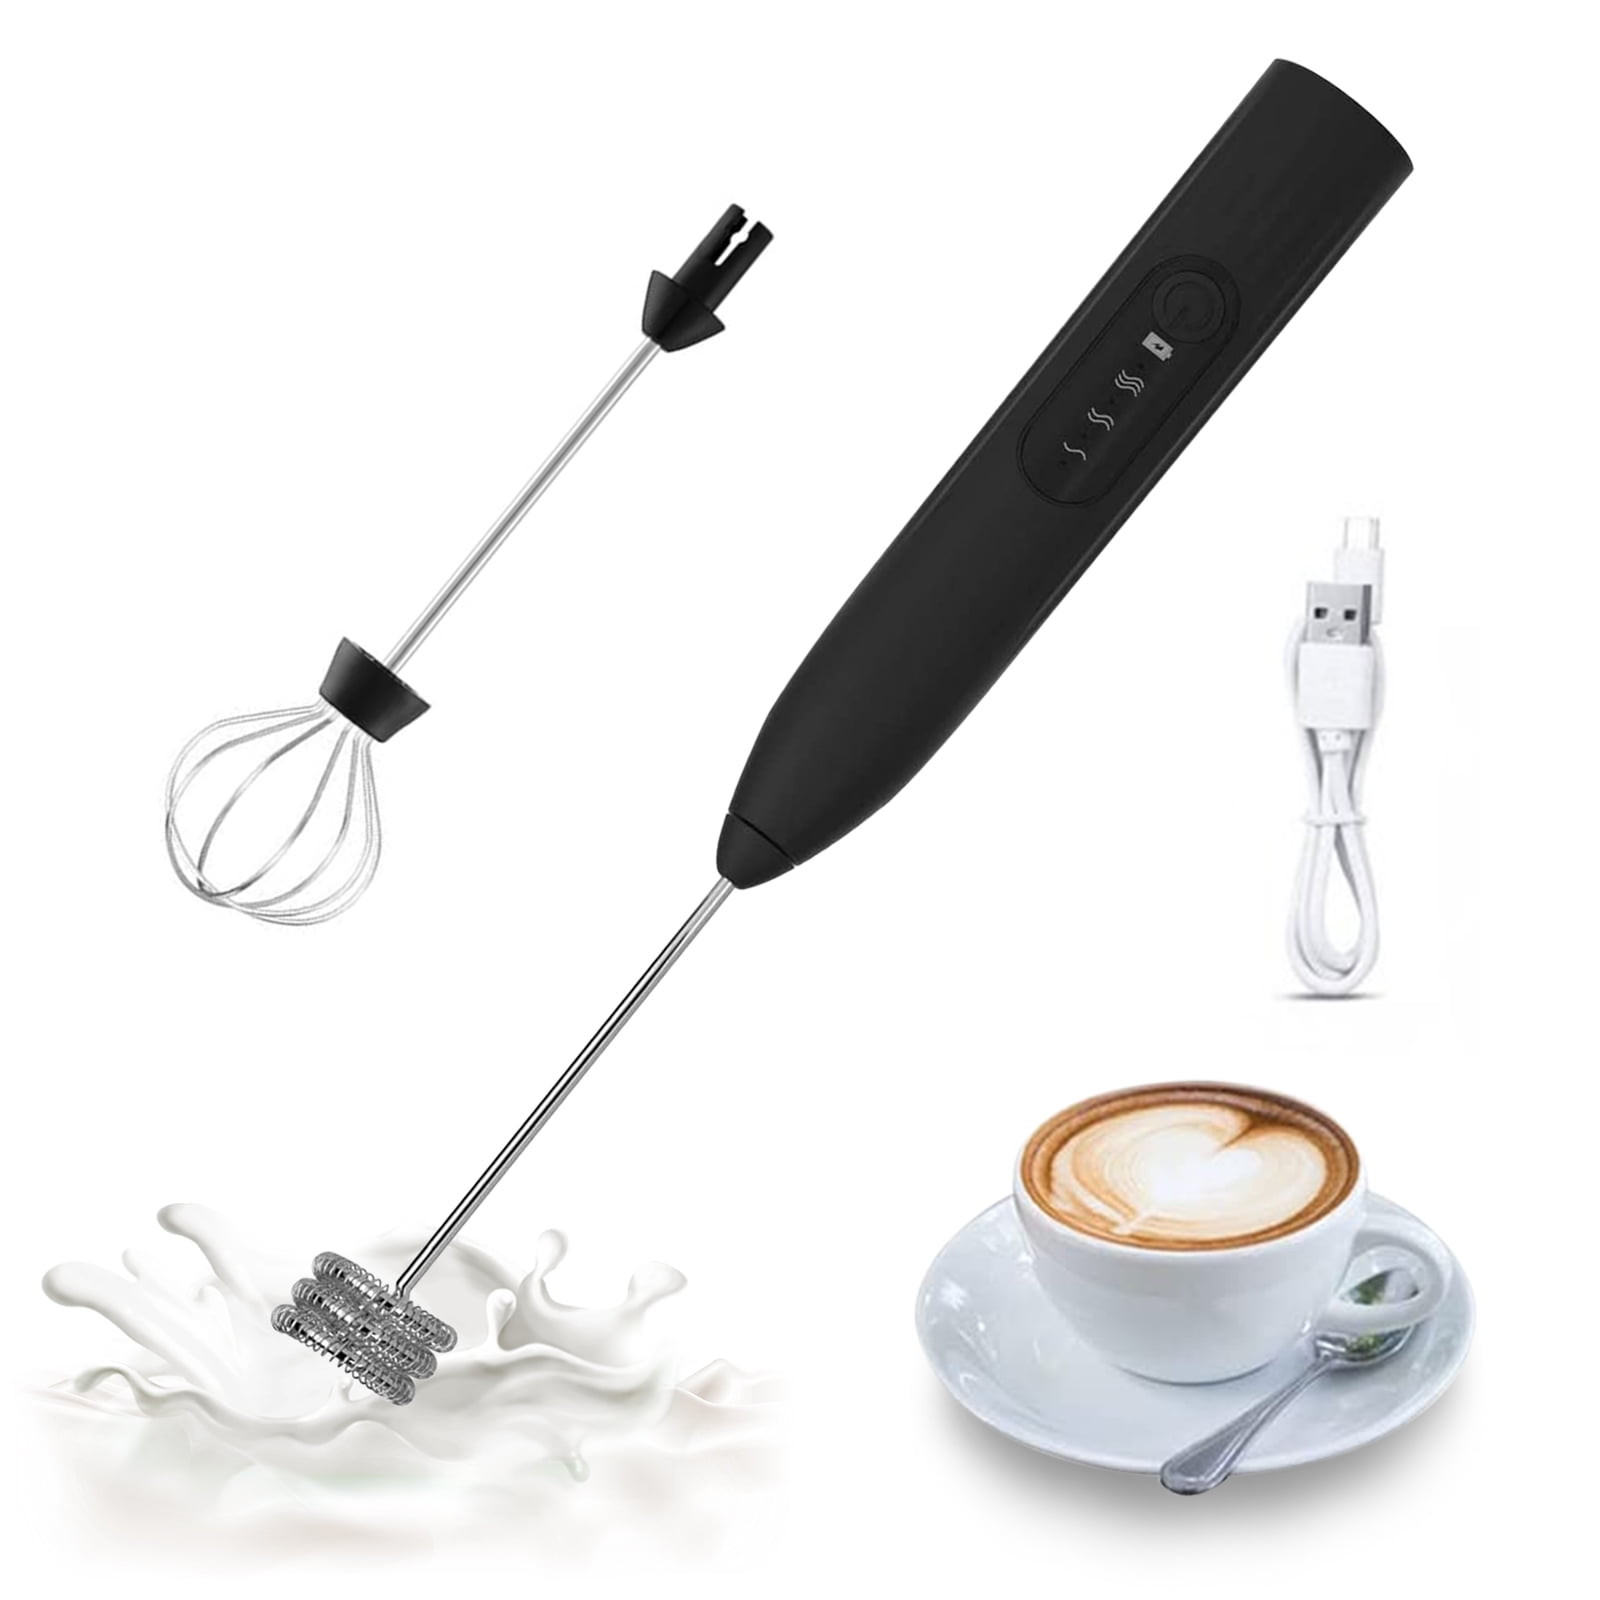 Electric Milk Frother Handheld Whisk Coffee Frother Mixer with Stainless whisks 3 Speed Adjustable Foam Maker for Coffee Matcha Latte Cappuccino Hot Drinks Egg, Black, COOSERRY - Walmart.com